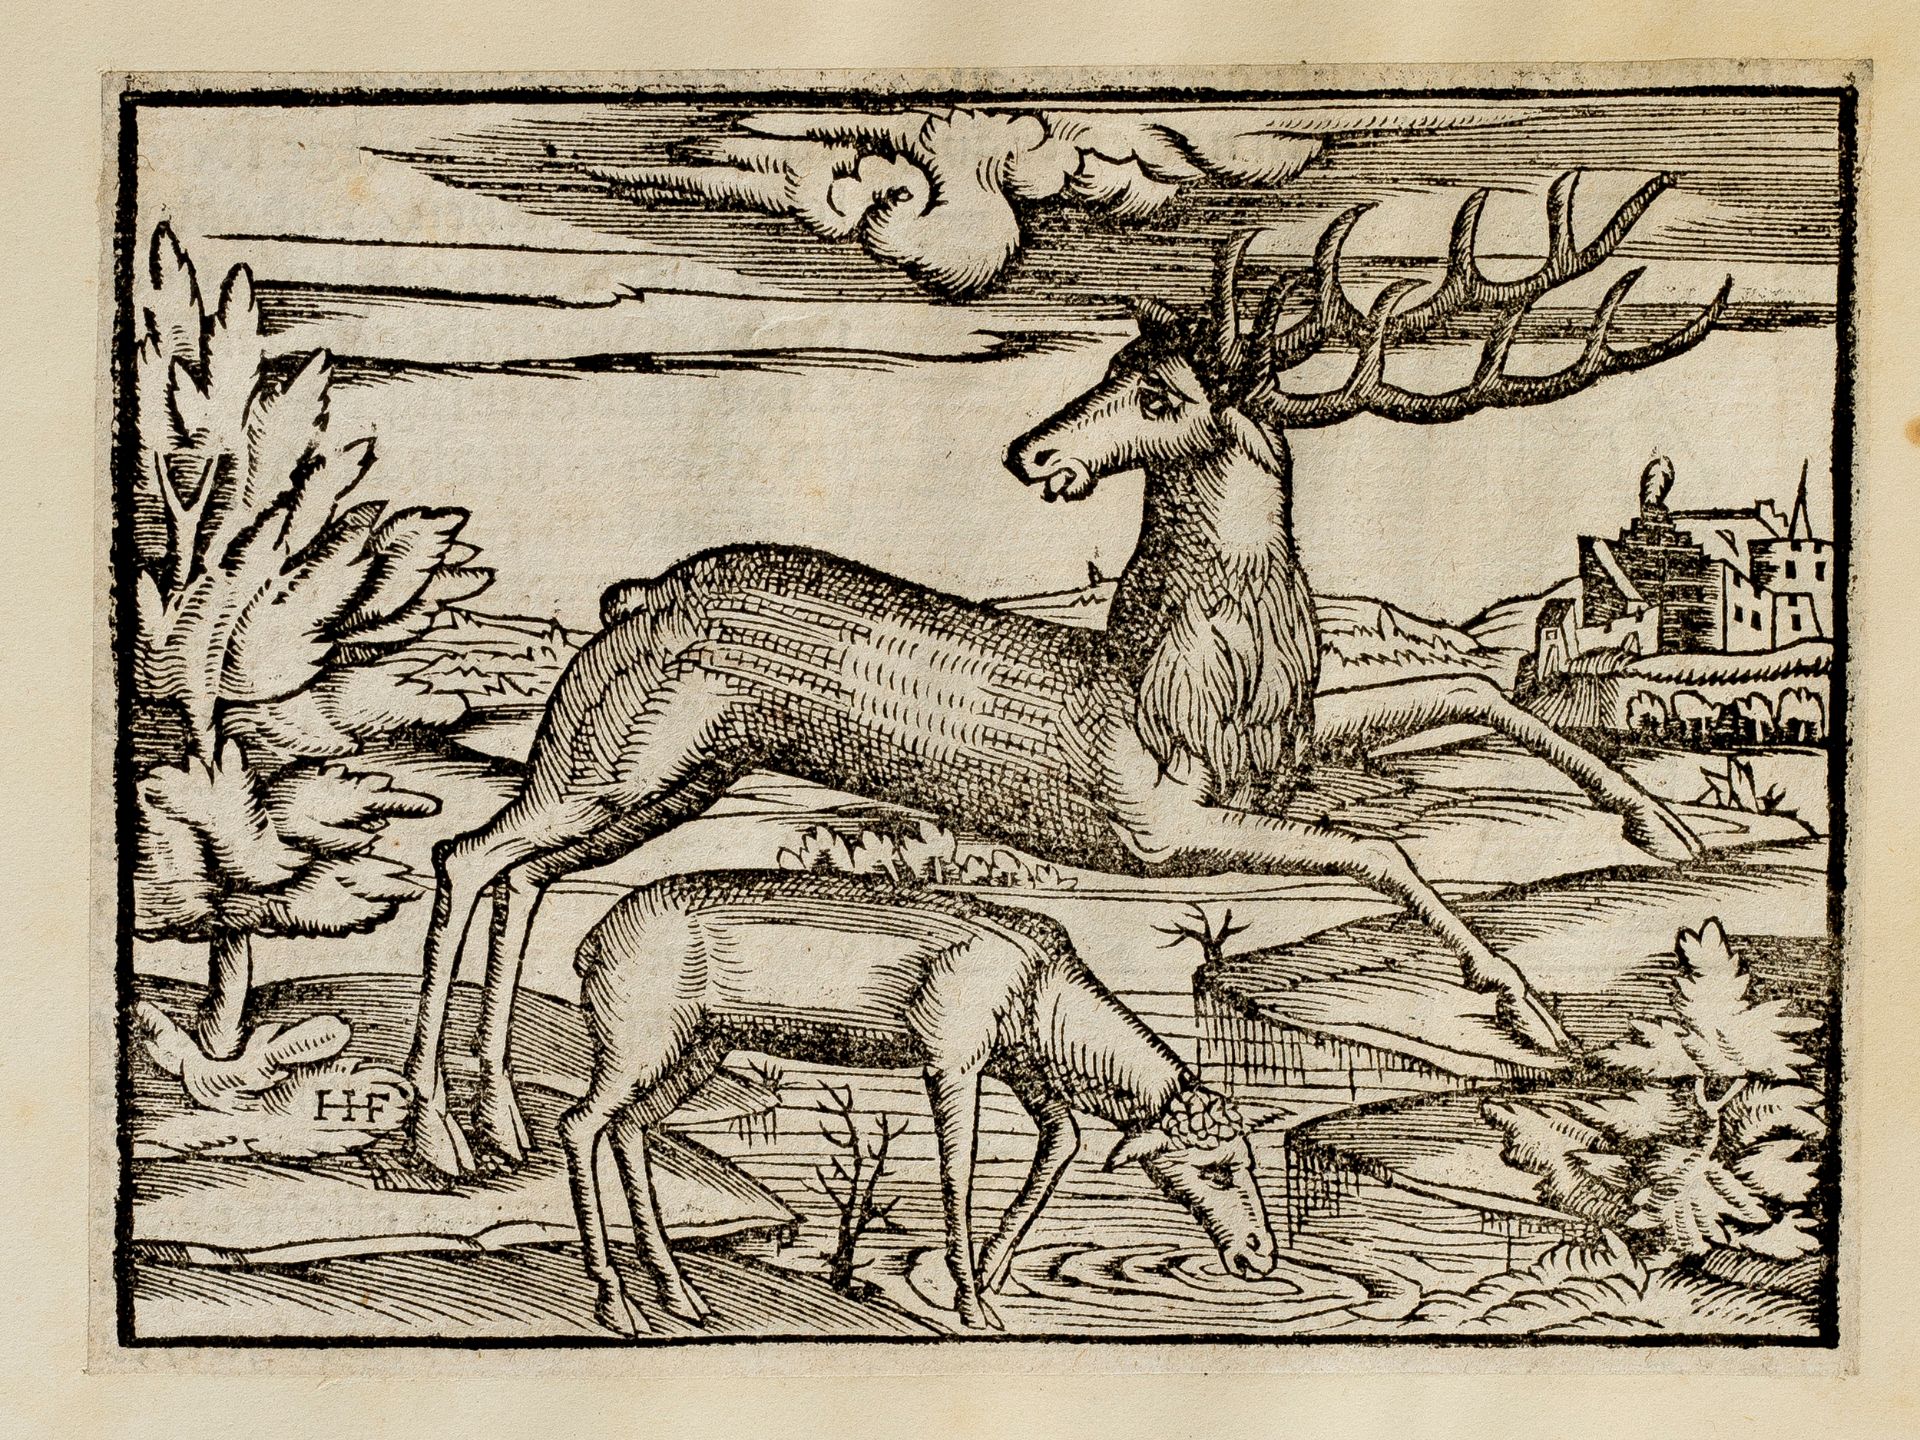 Monogramist H.F., Follower, "Stag and Stag Calf" & "Bucephalus". - Image 3 of 5